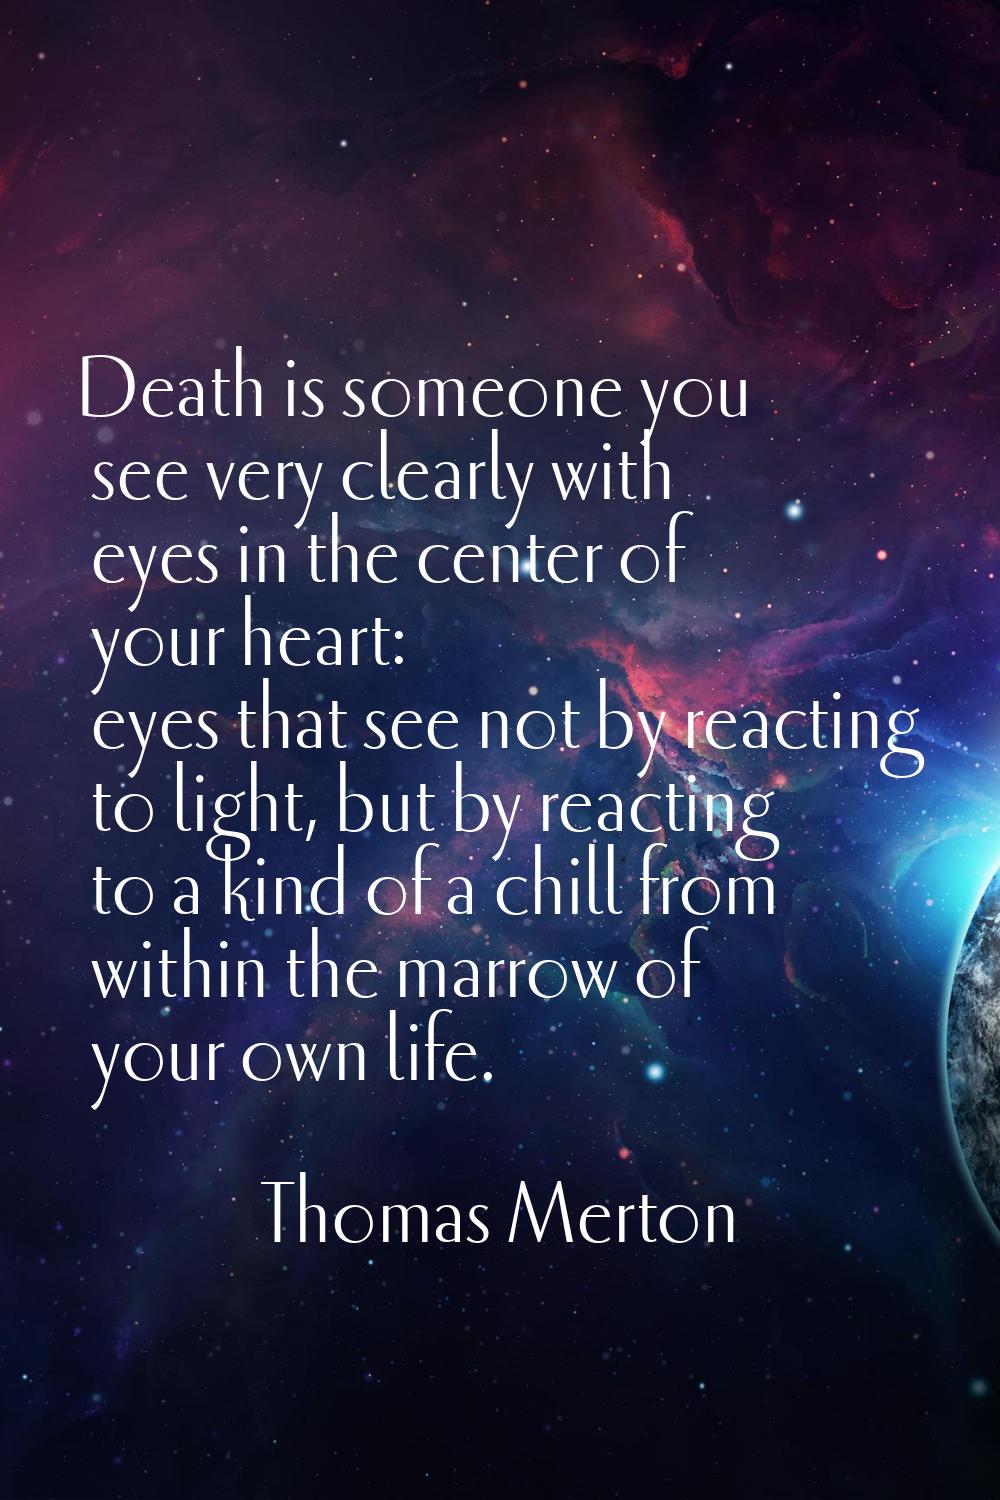 Death is someone you see very clearly with eyes in the center of your heart: eyes that see not by r